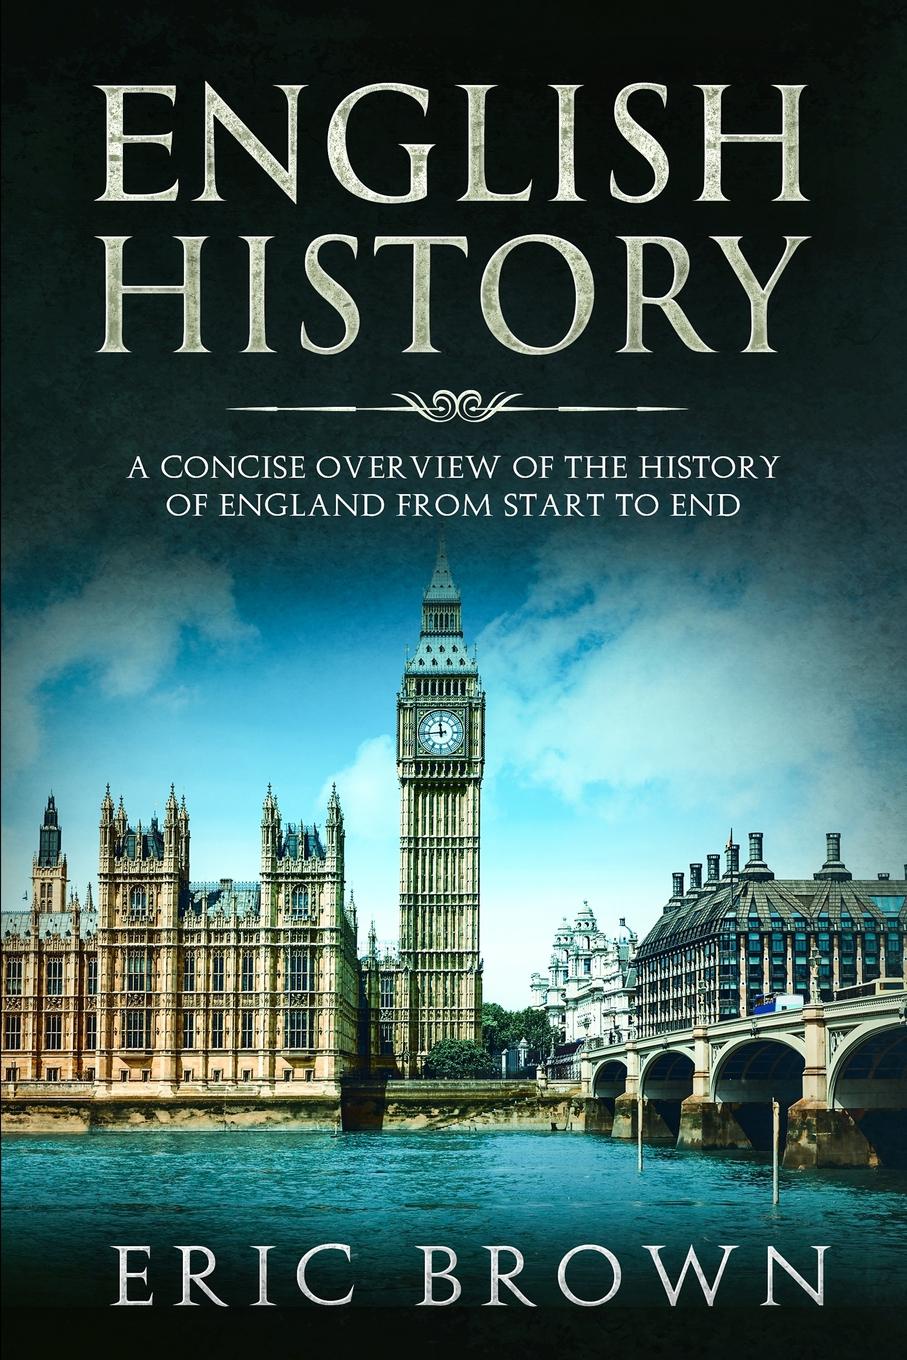 English History. A Concise Overview of the History of England from Start to End